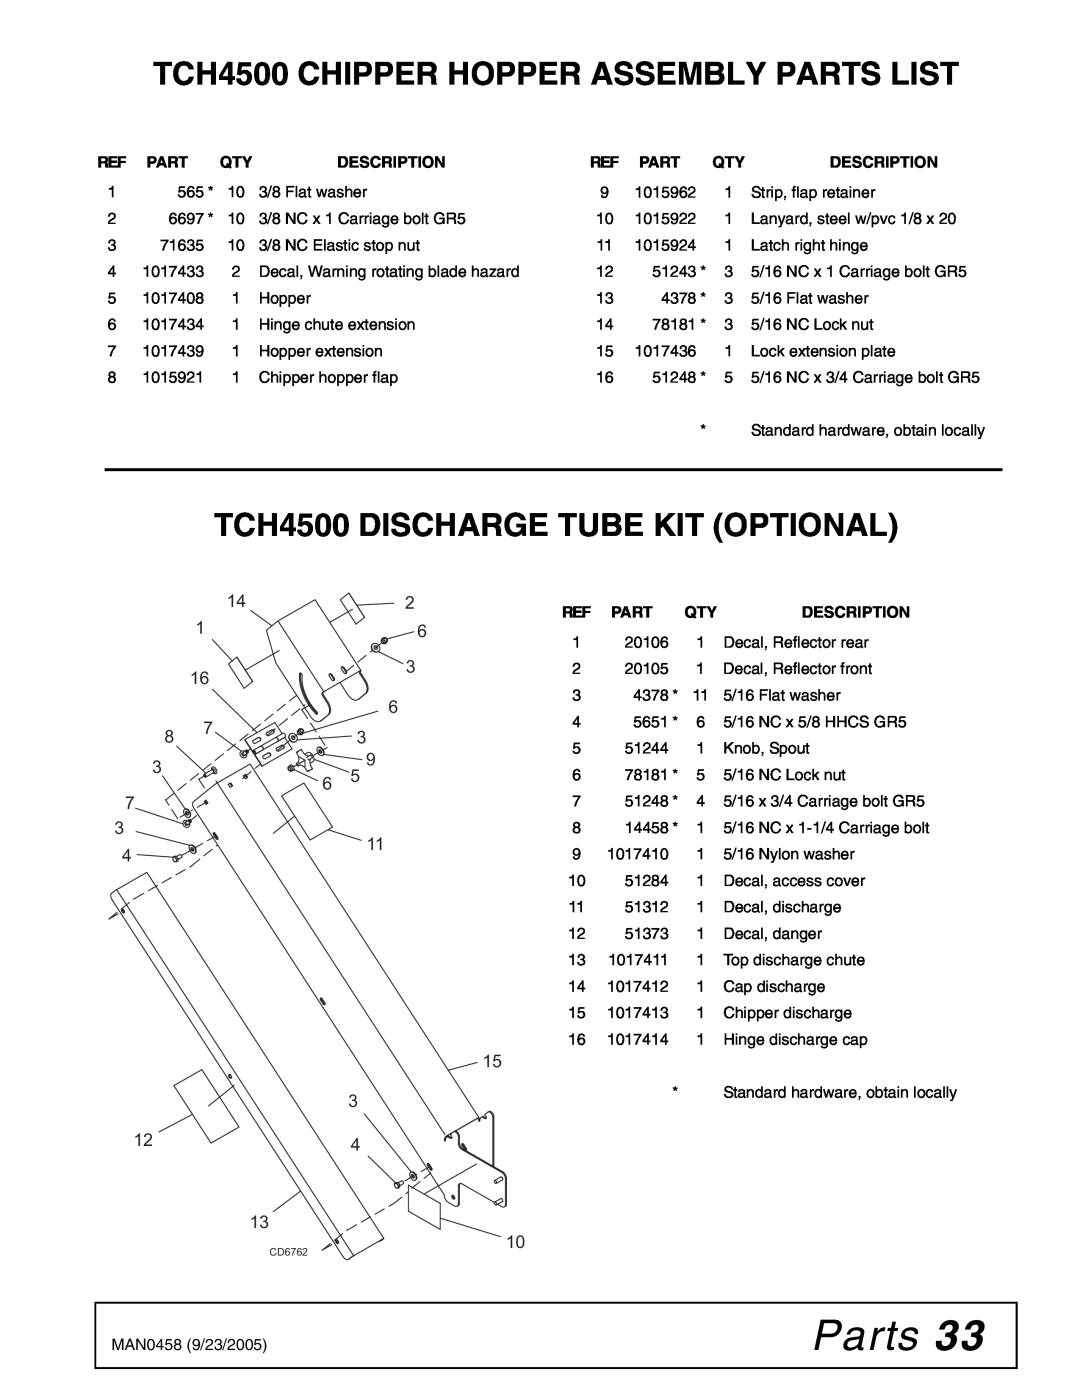 Woods Equipment manual TCH4500 CHIPPER HOPPER ASSEMBLY PARTS LIST, TCH4500 DISCHARGE TUBE KIT OPTIONAL, Parts 